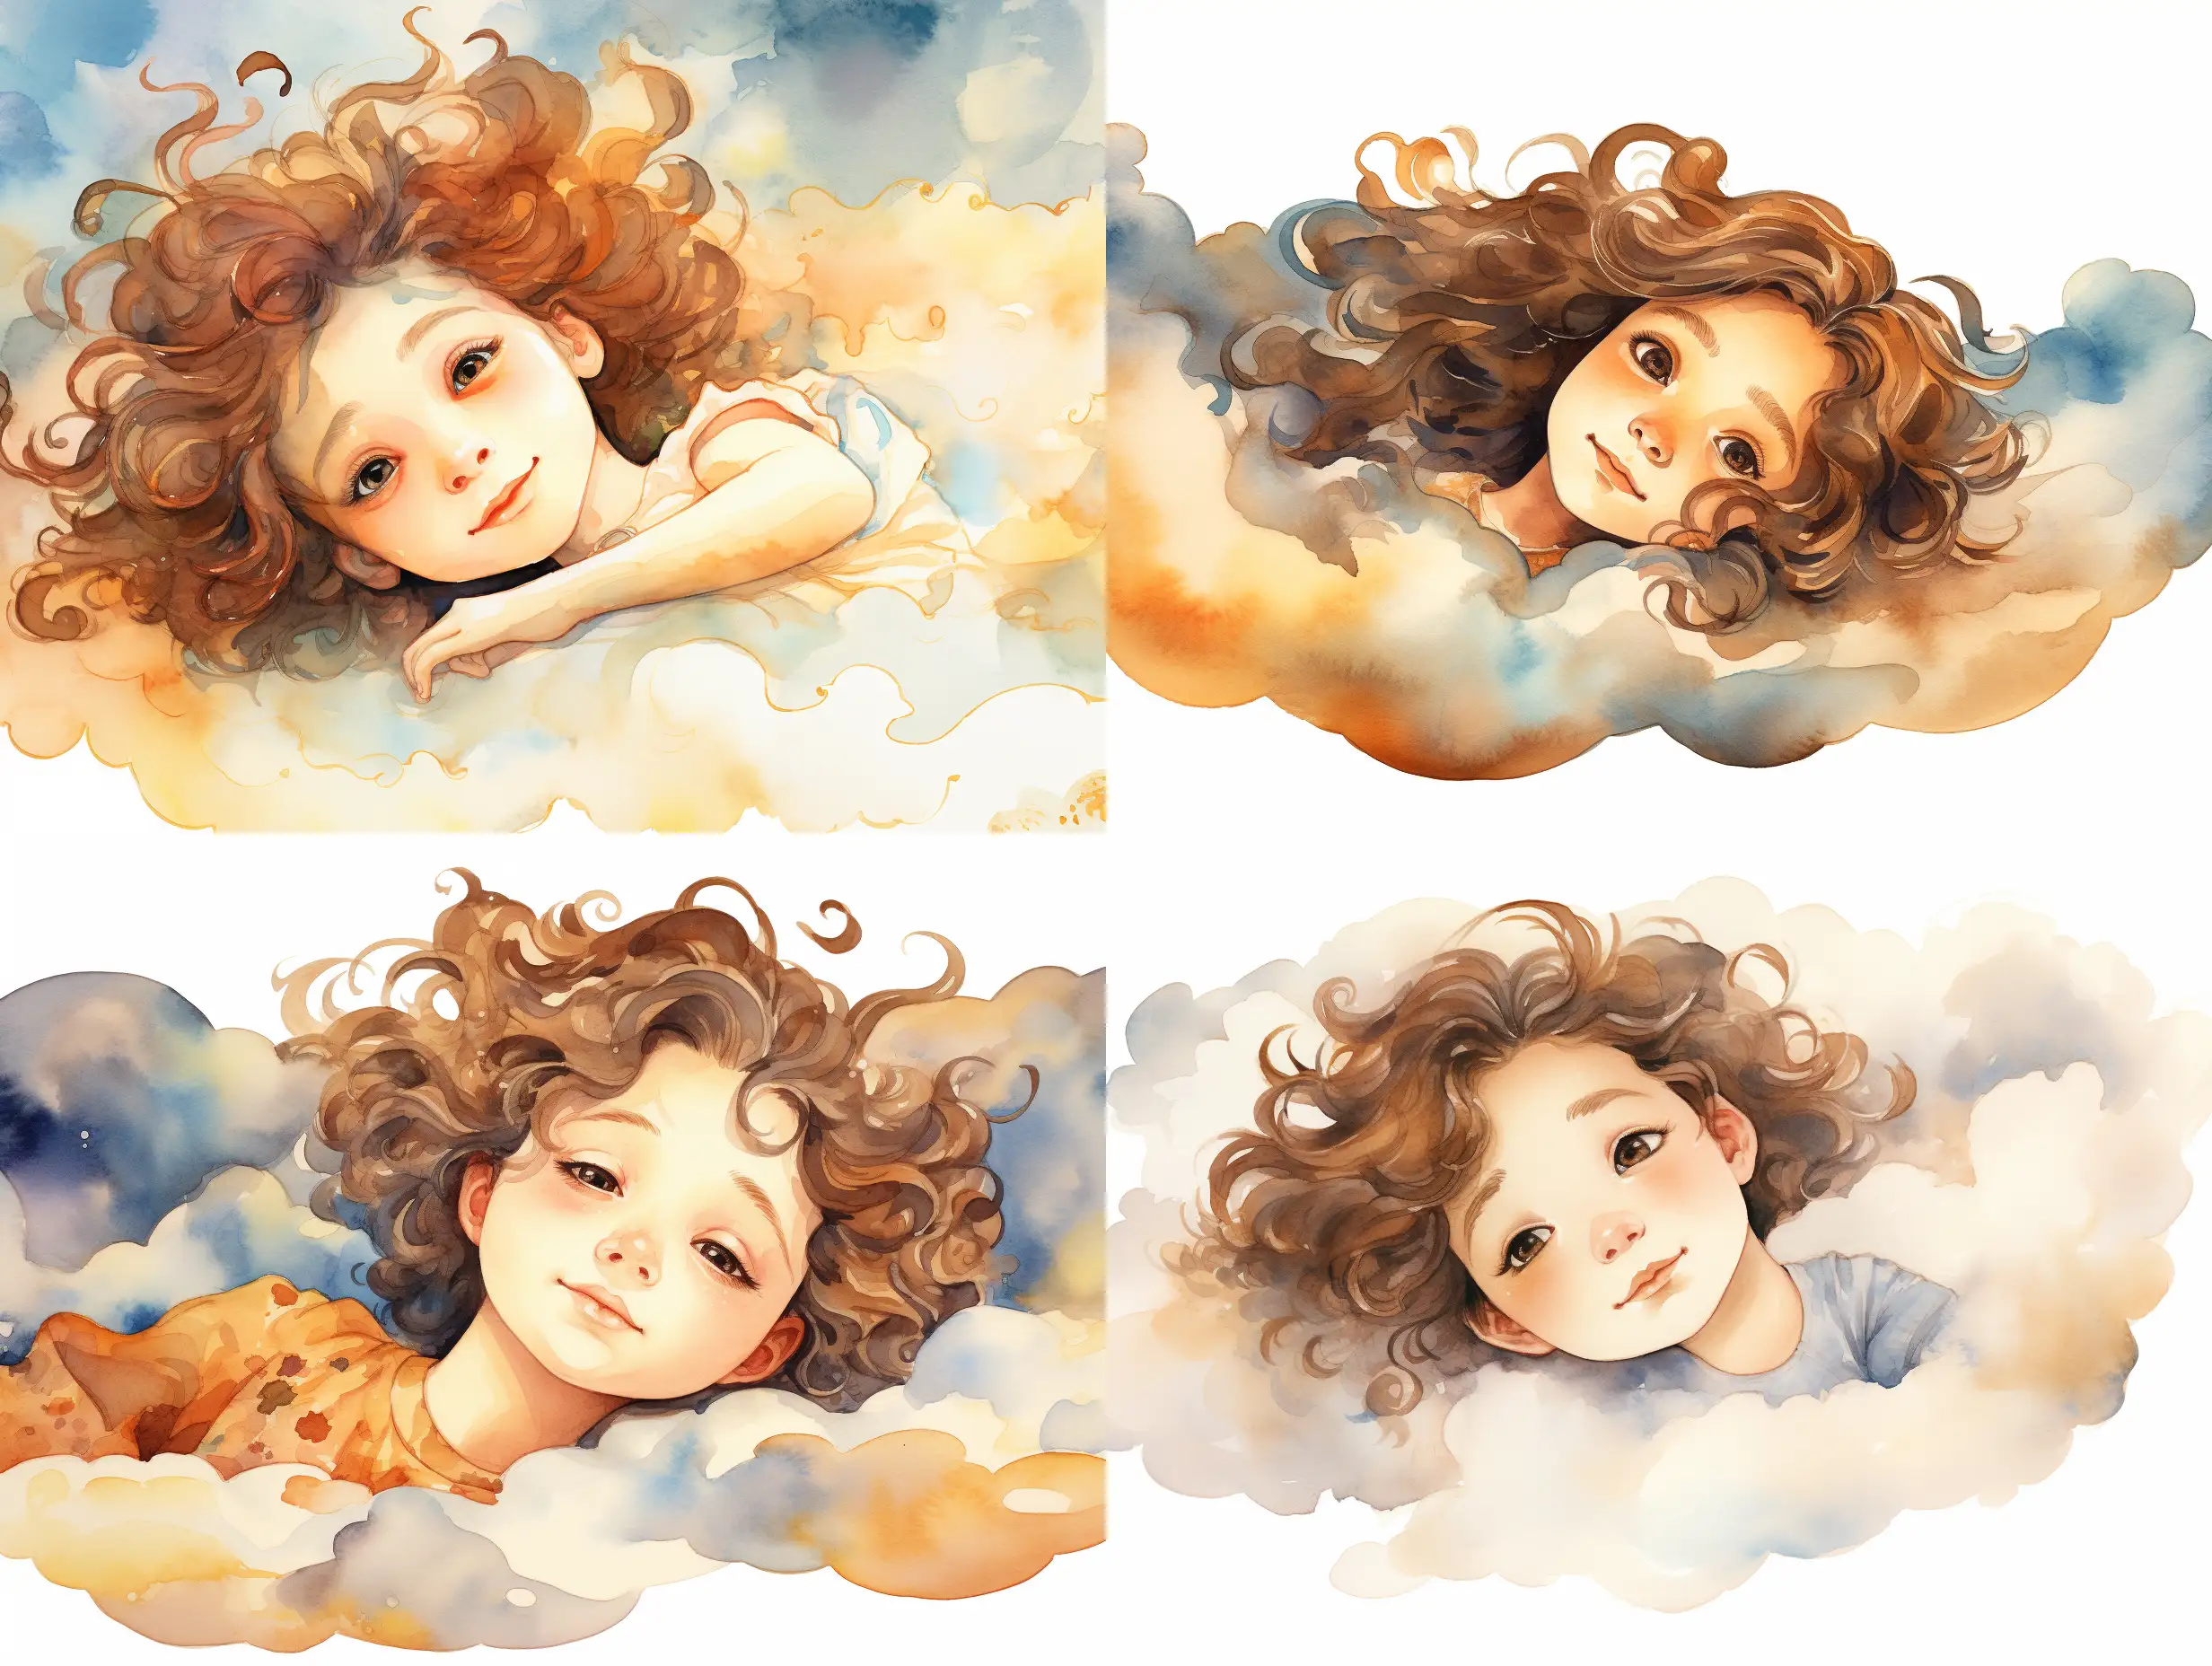 Dreamy-ThreeYearOld-Girl-Resting-on-Clouds-in-Decorative-Watercolor-Illustration